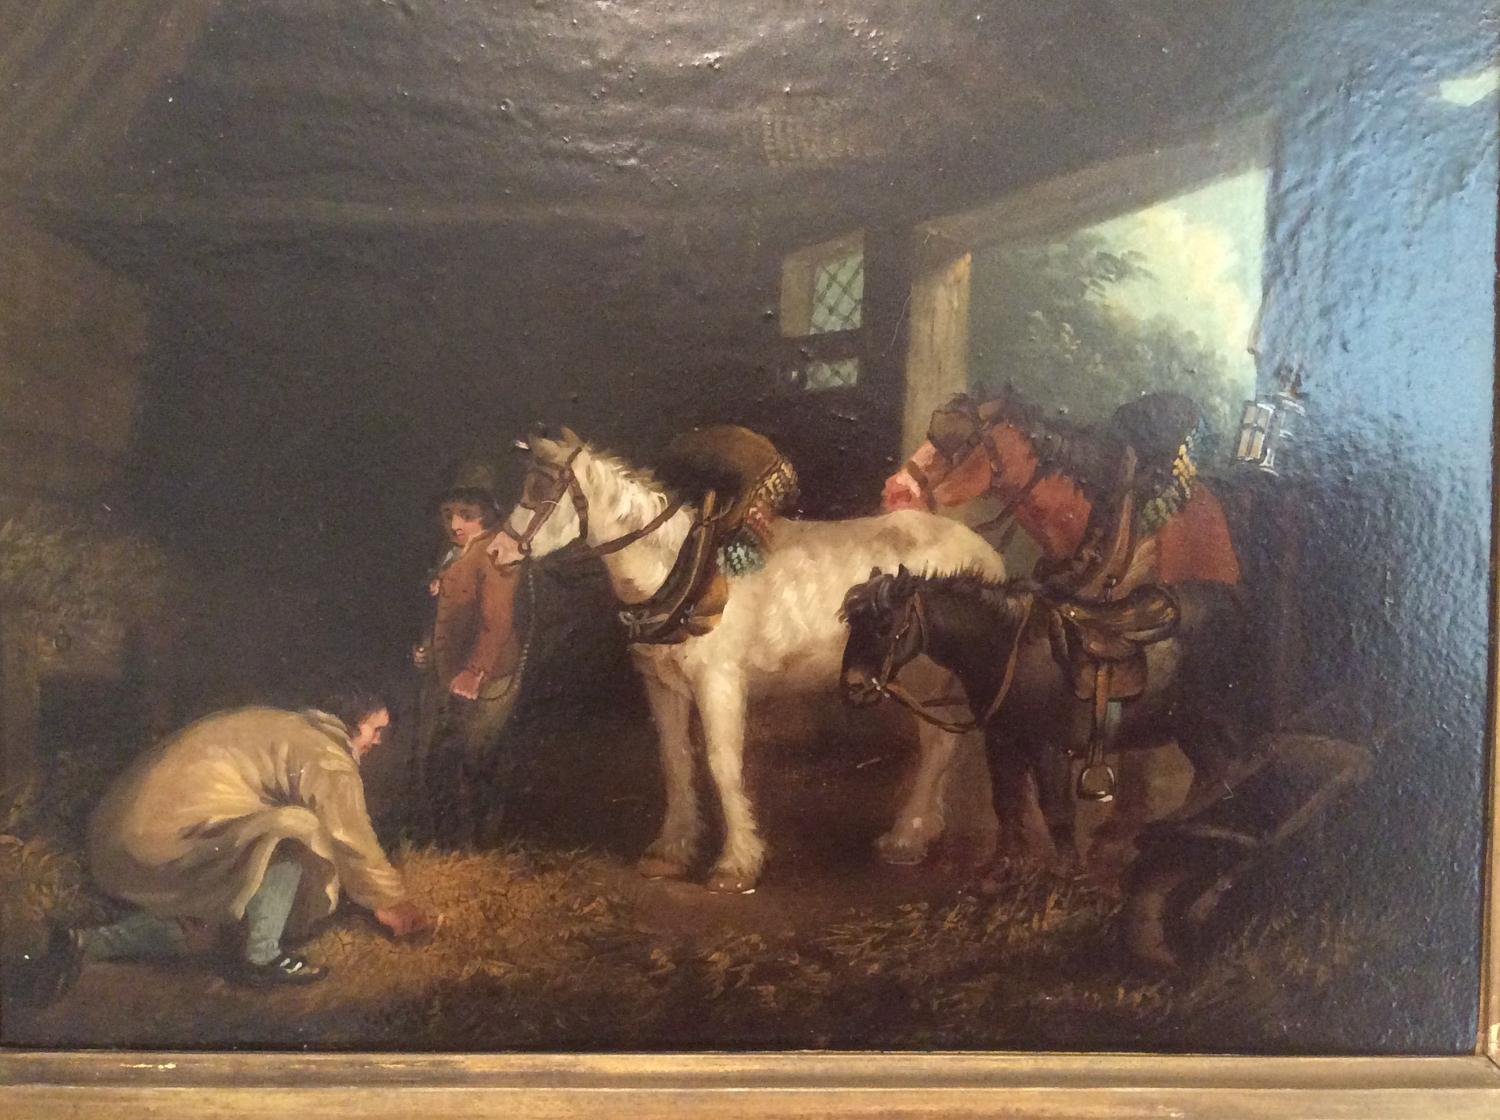 19th century oil on copper painting after George Moreland